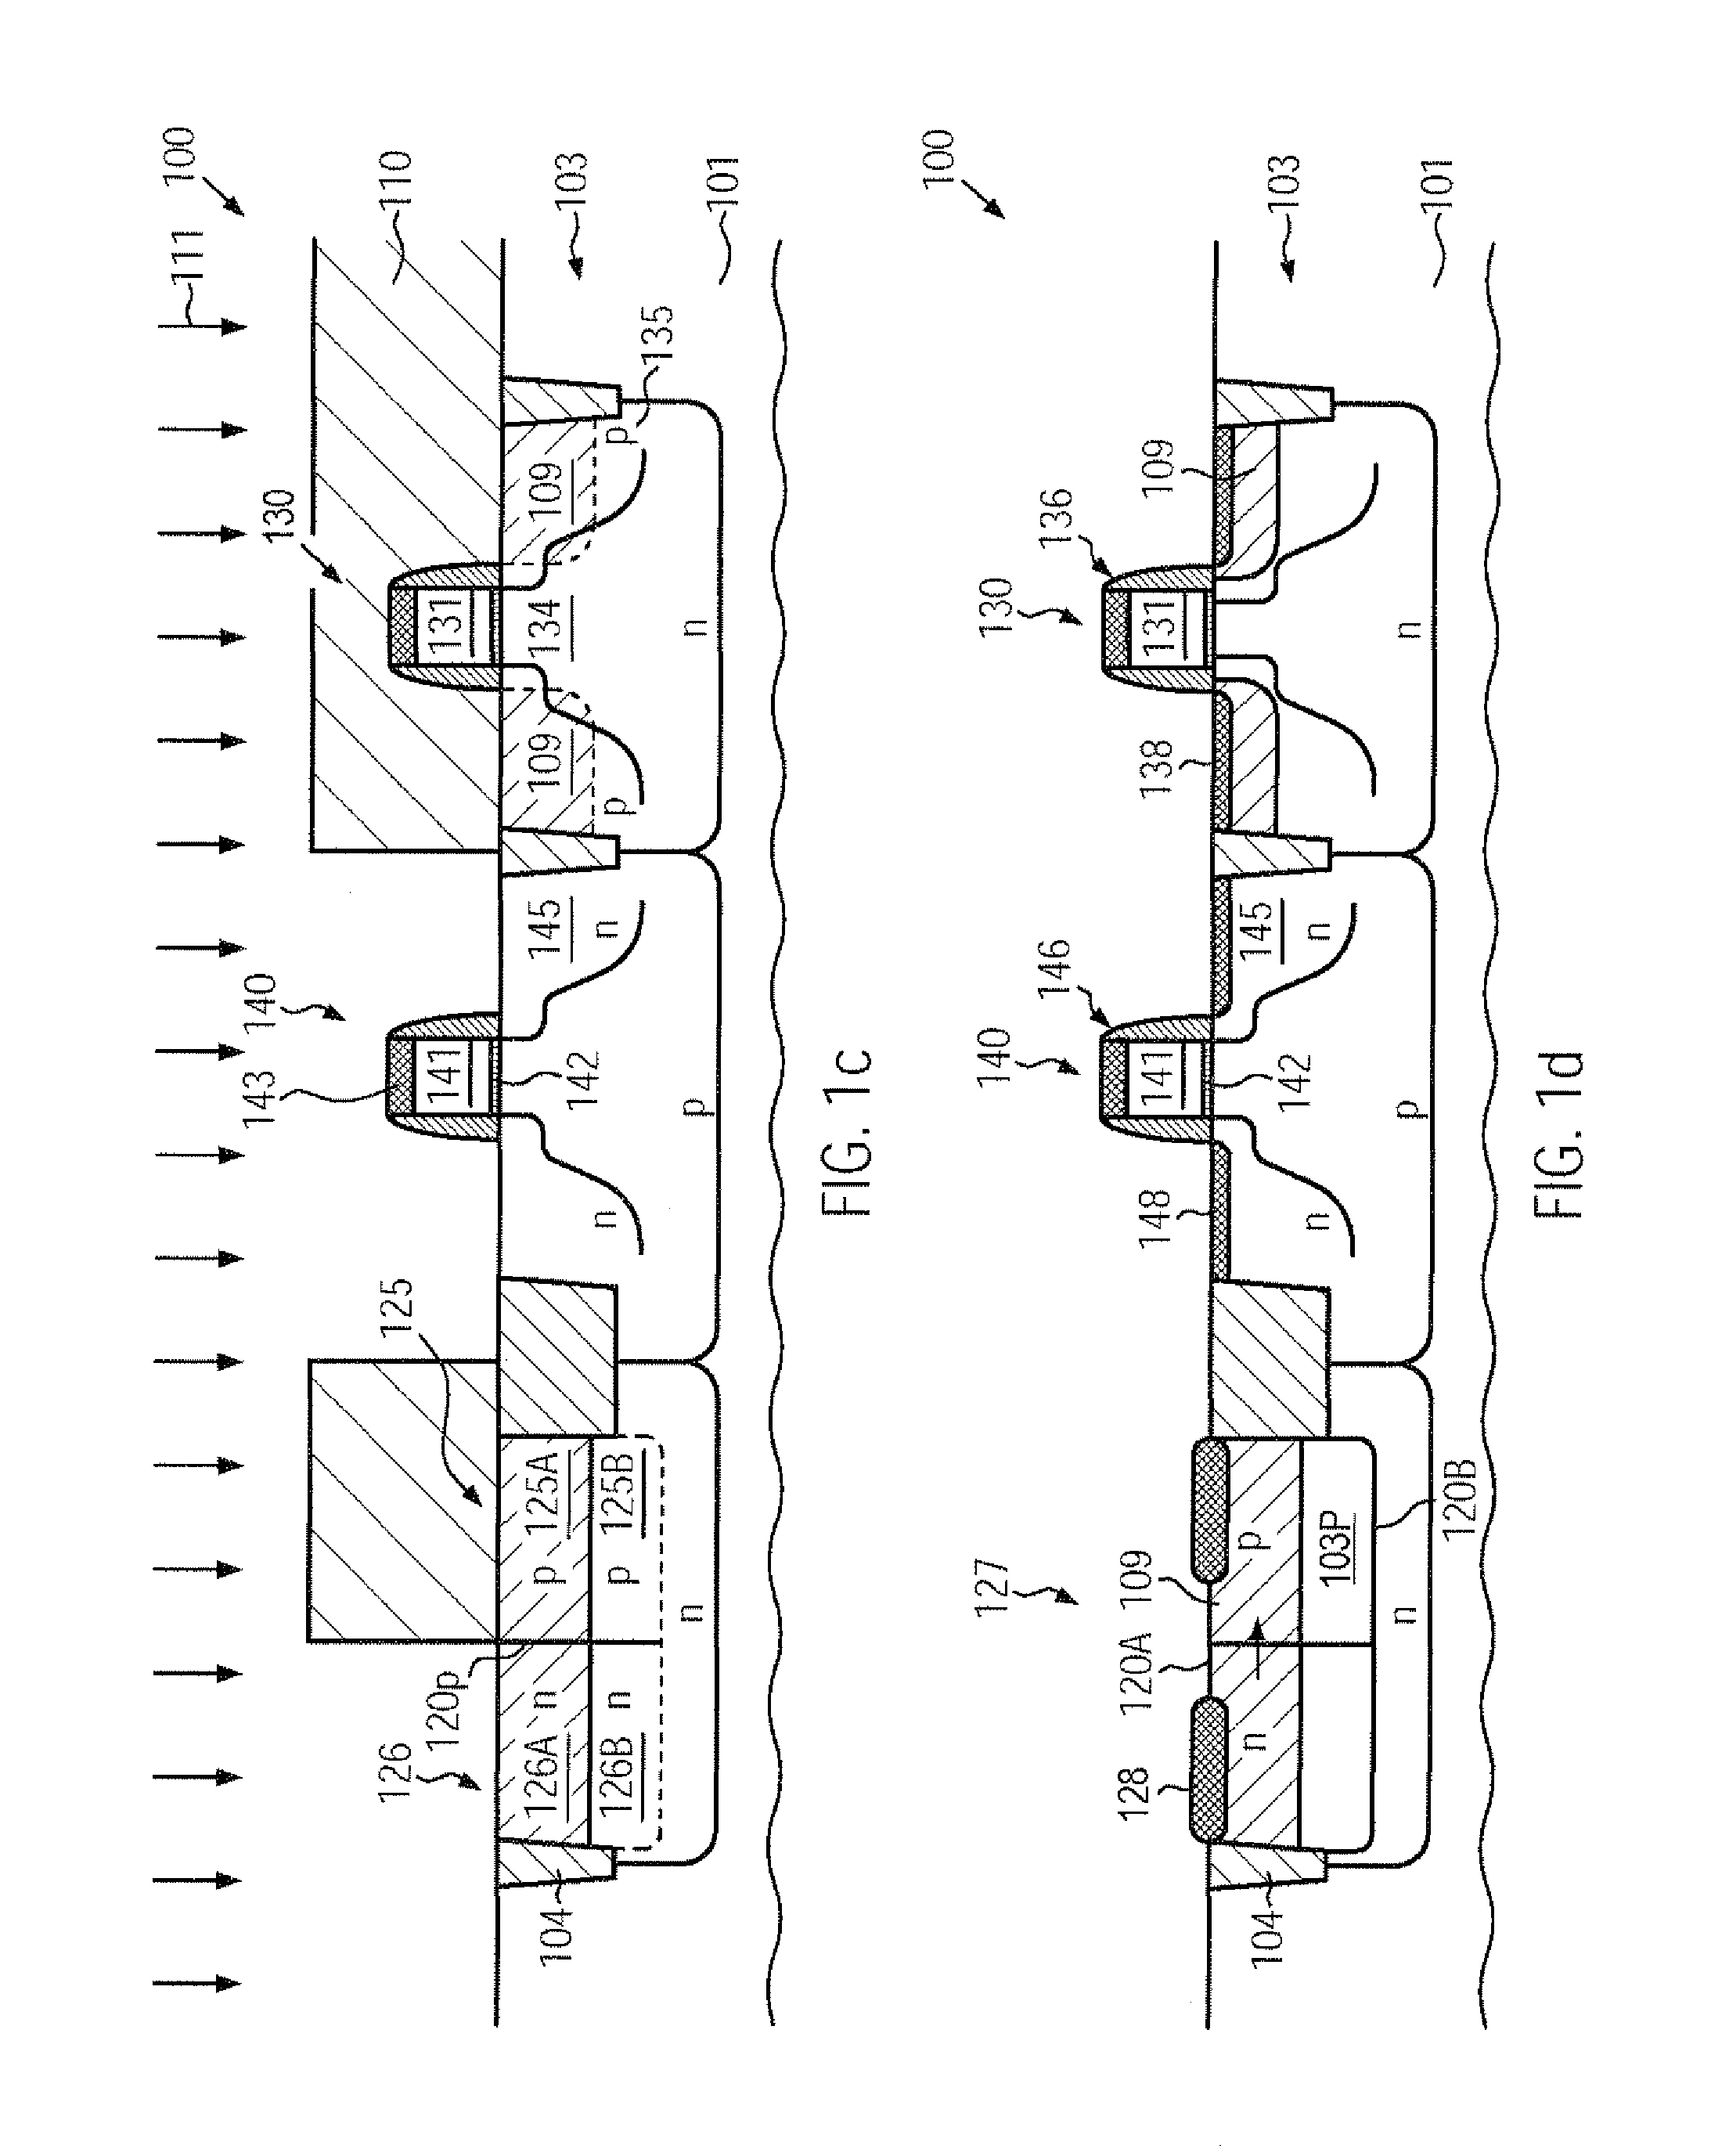 Temperature monitoring in a semiconductor device by using an pn junction based on silicon/germanium material